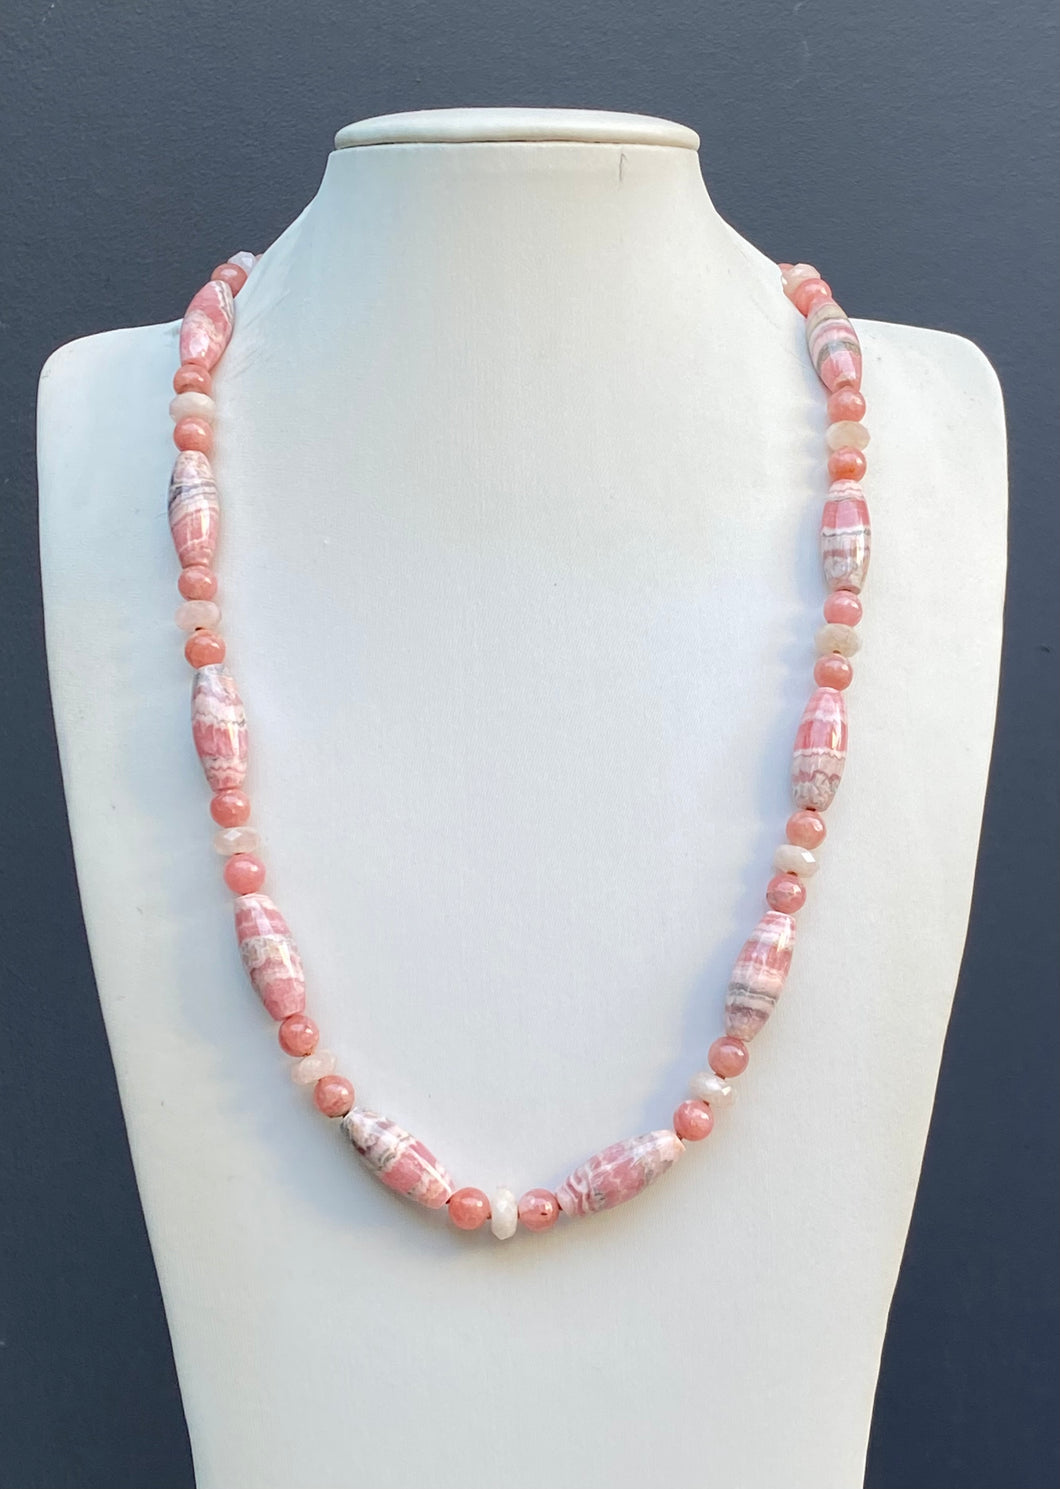 Sterling Silver Rhodochrosite and Morganite Necklace